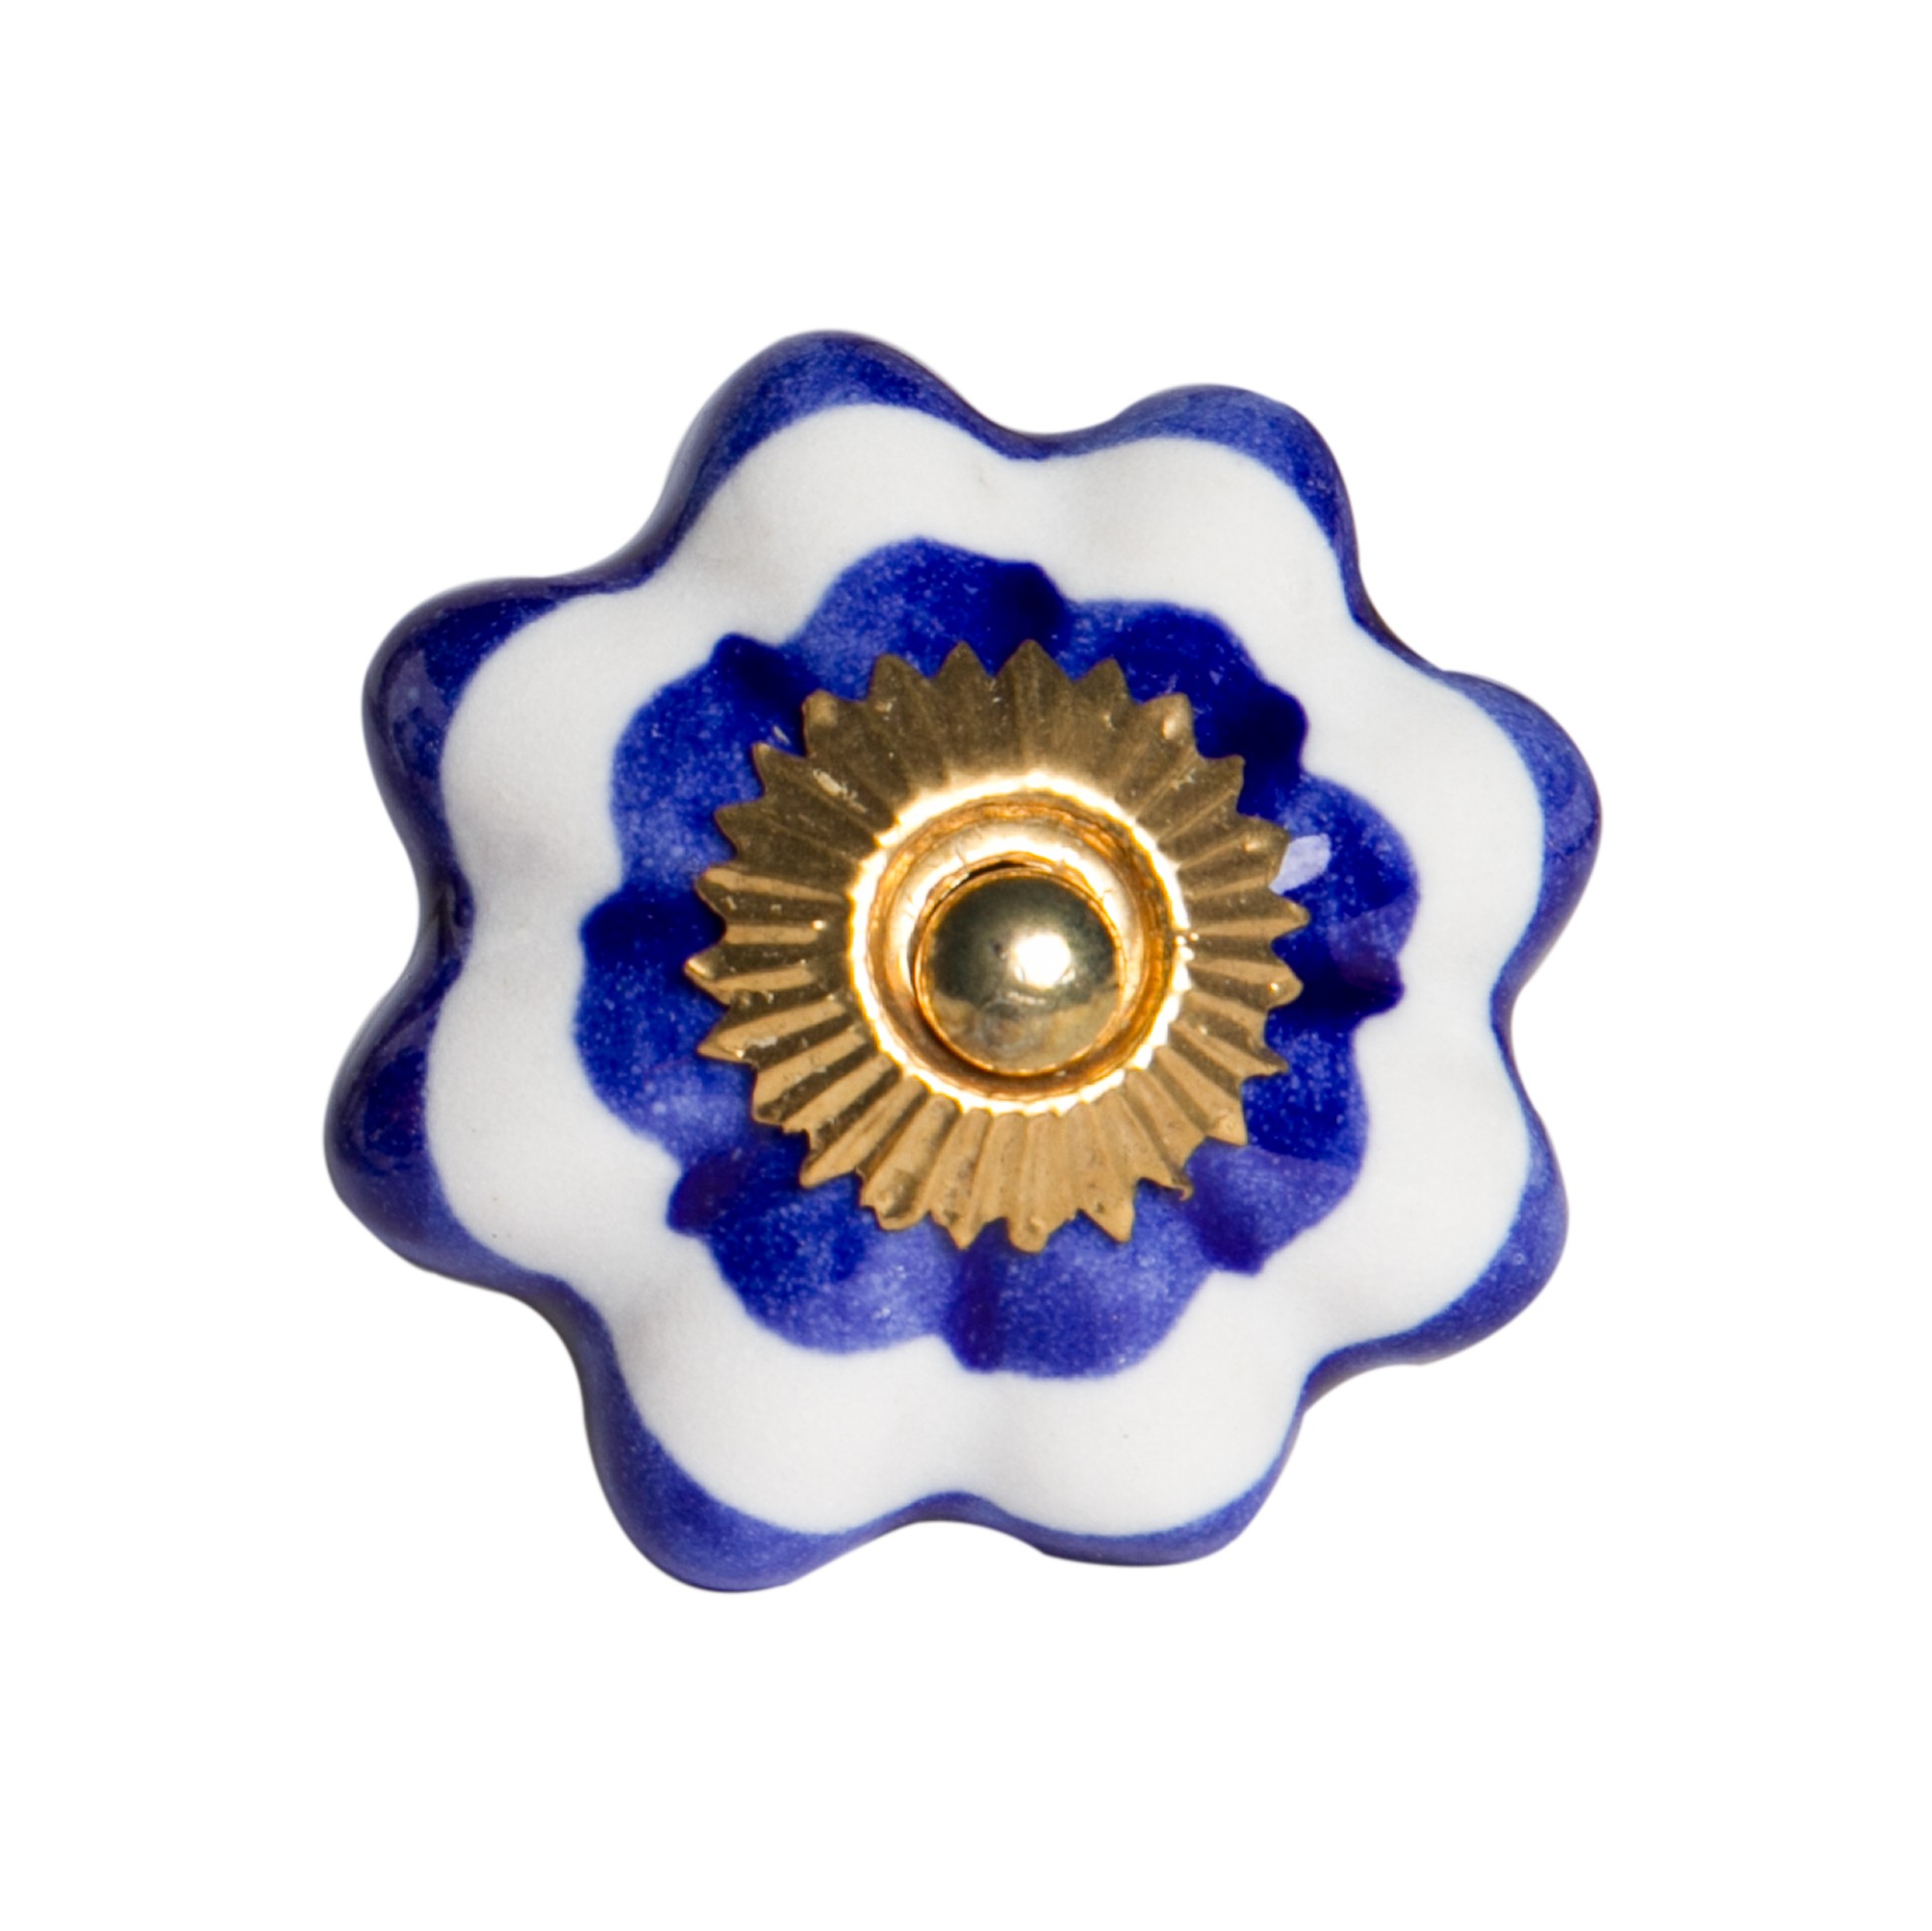 1.5" x 1.5" x 1.5" White, Blue and Gold - Knobs 12-Pack